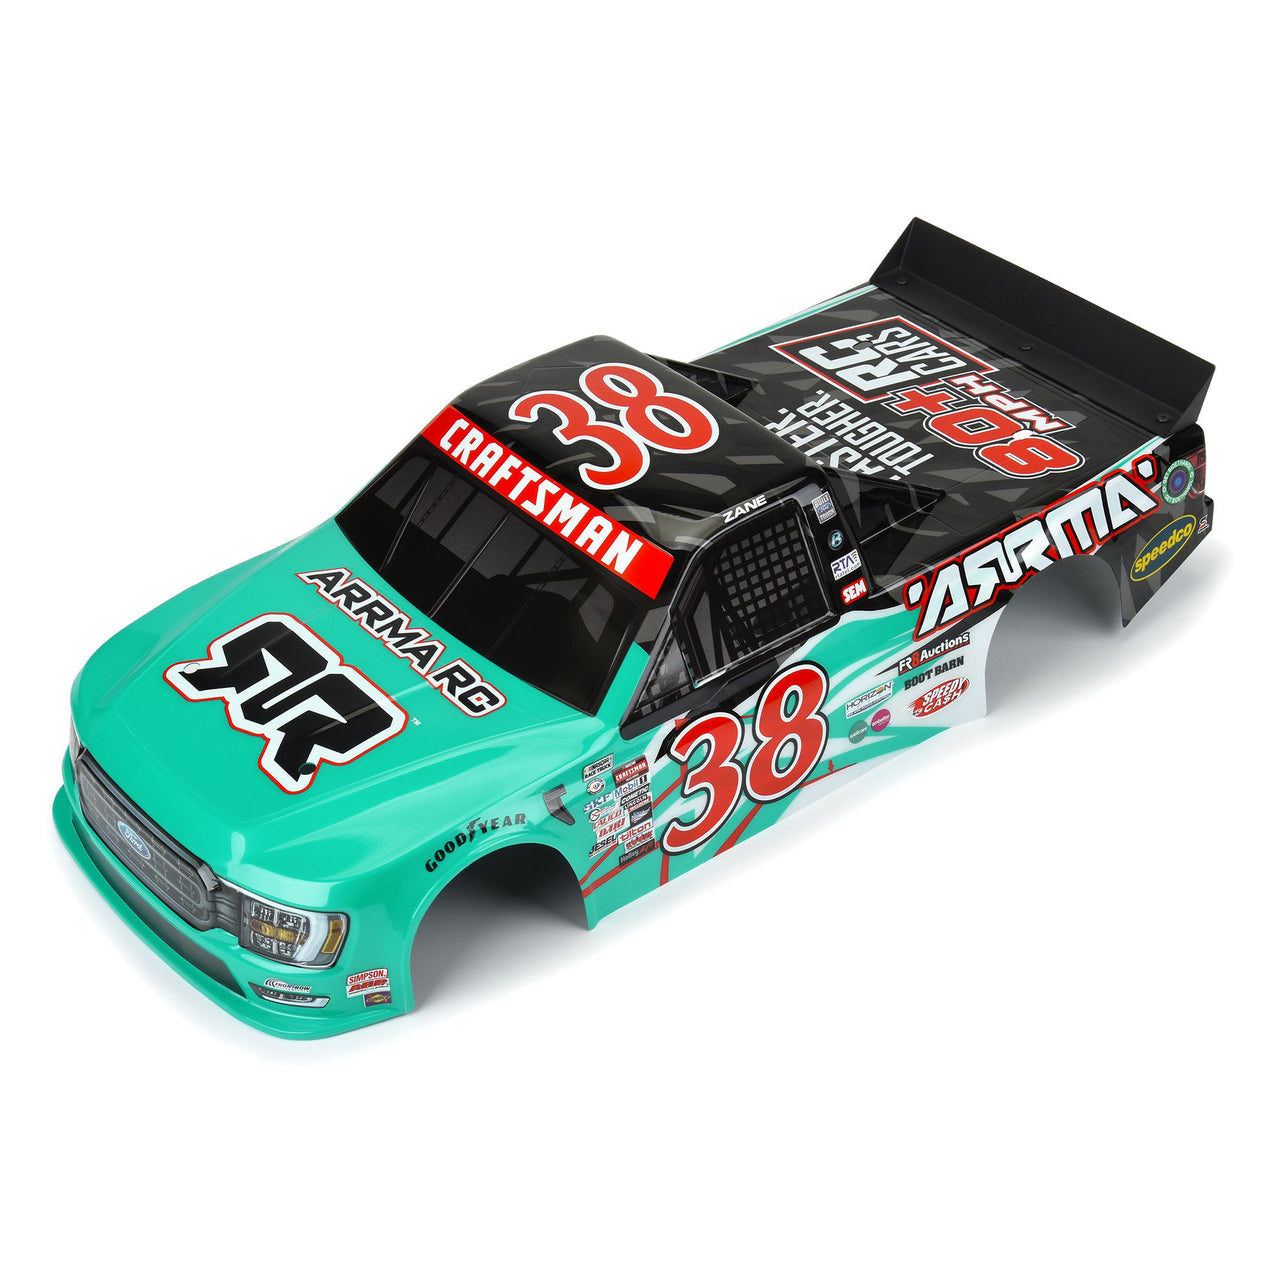 ARA410018 1/7 2023 NASCAR Ford F-150 No.38 Truck LE Body (Sarcelle) : Infraction 6S 